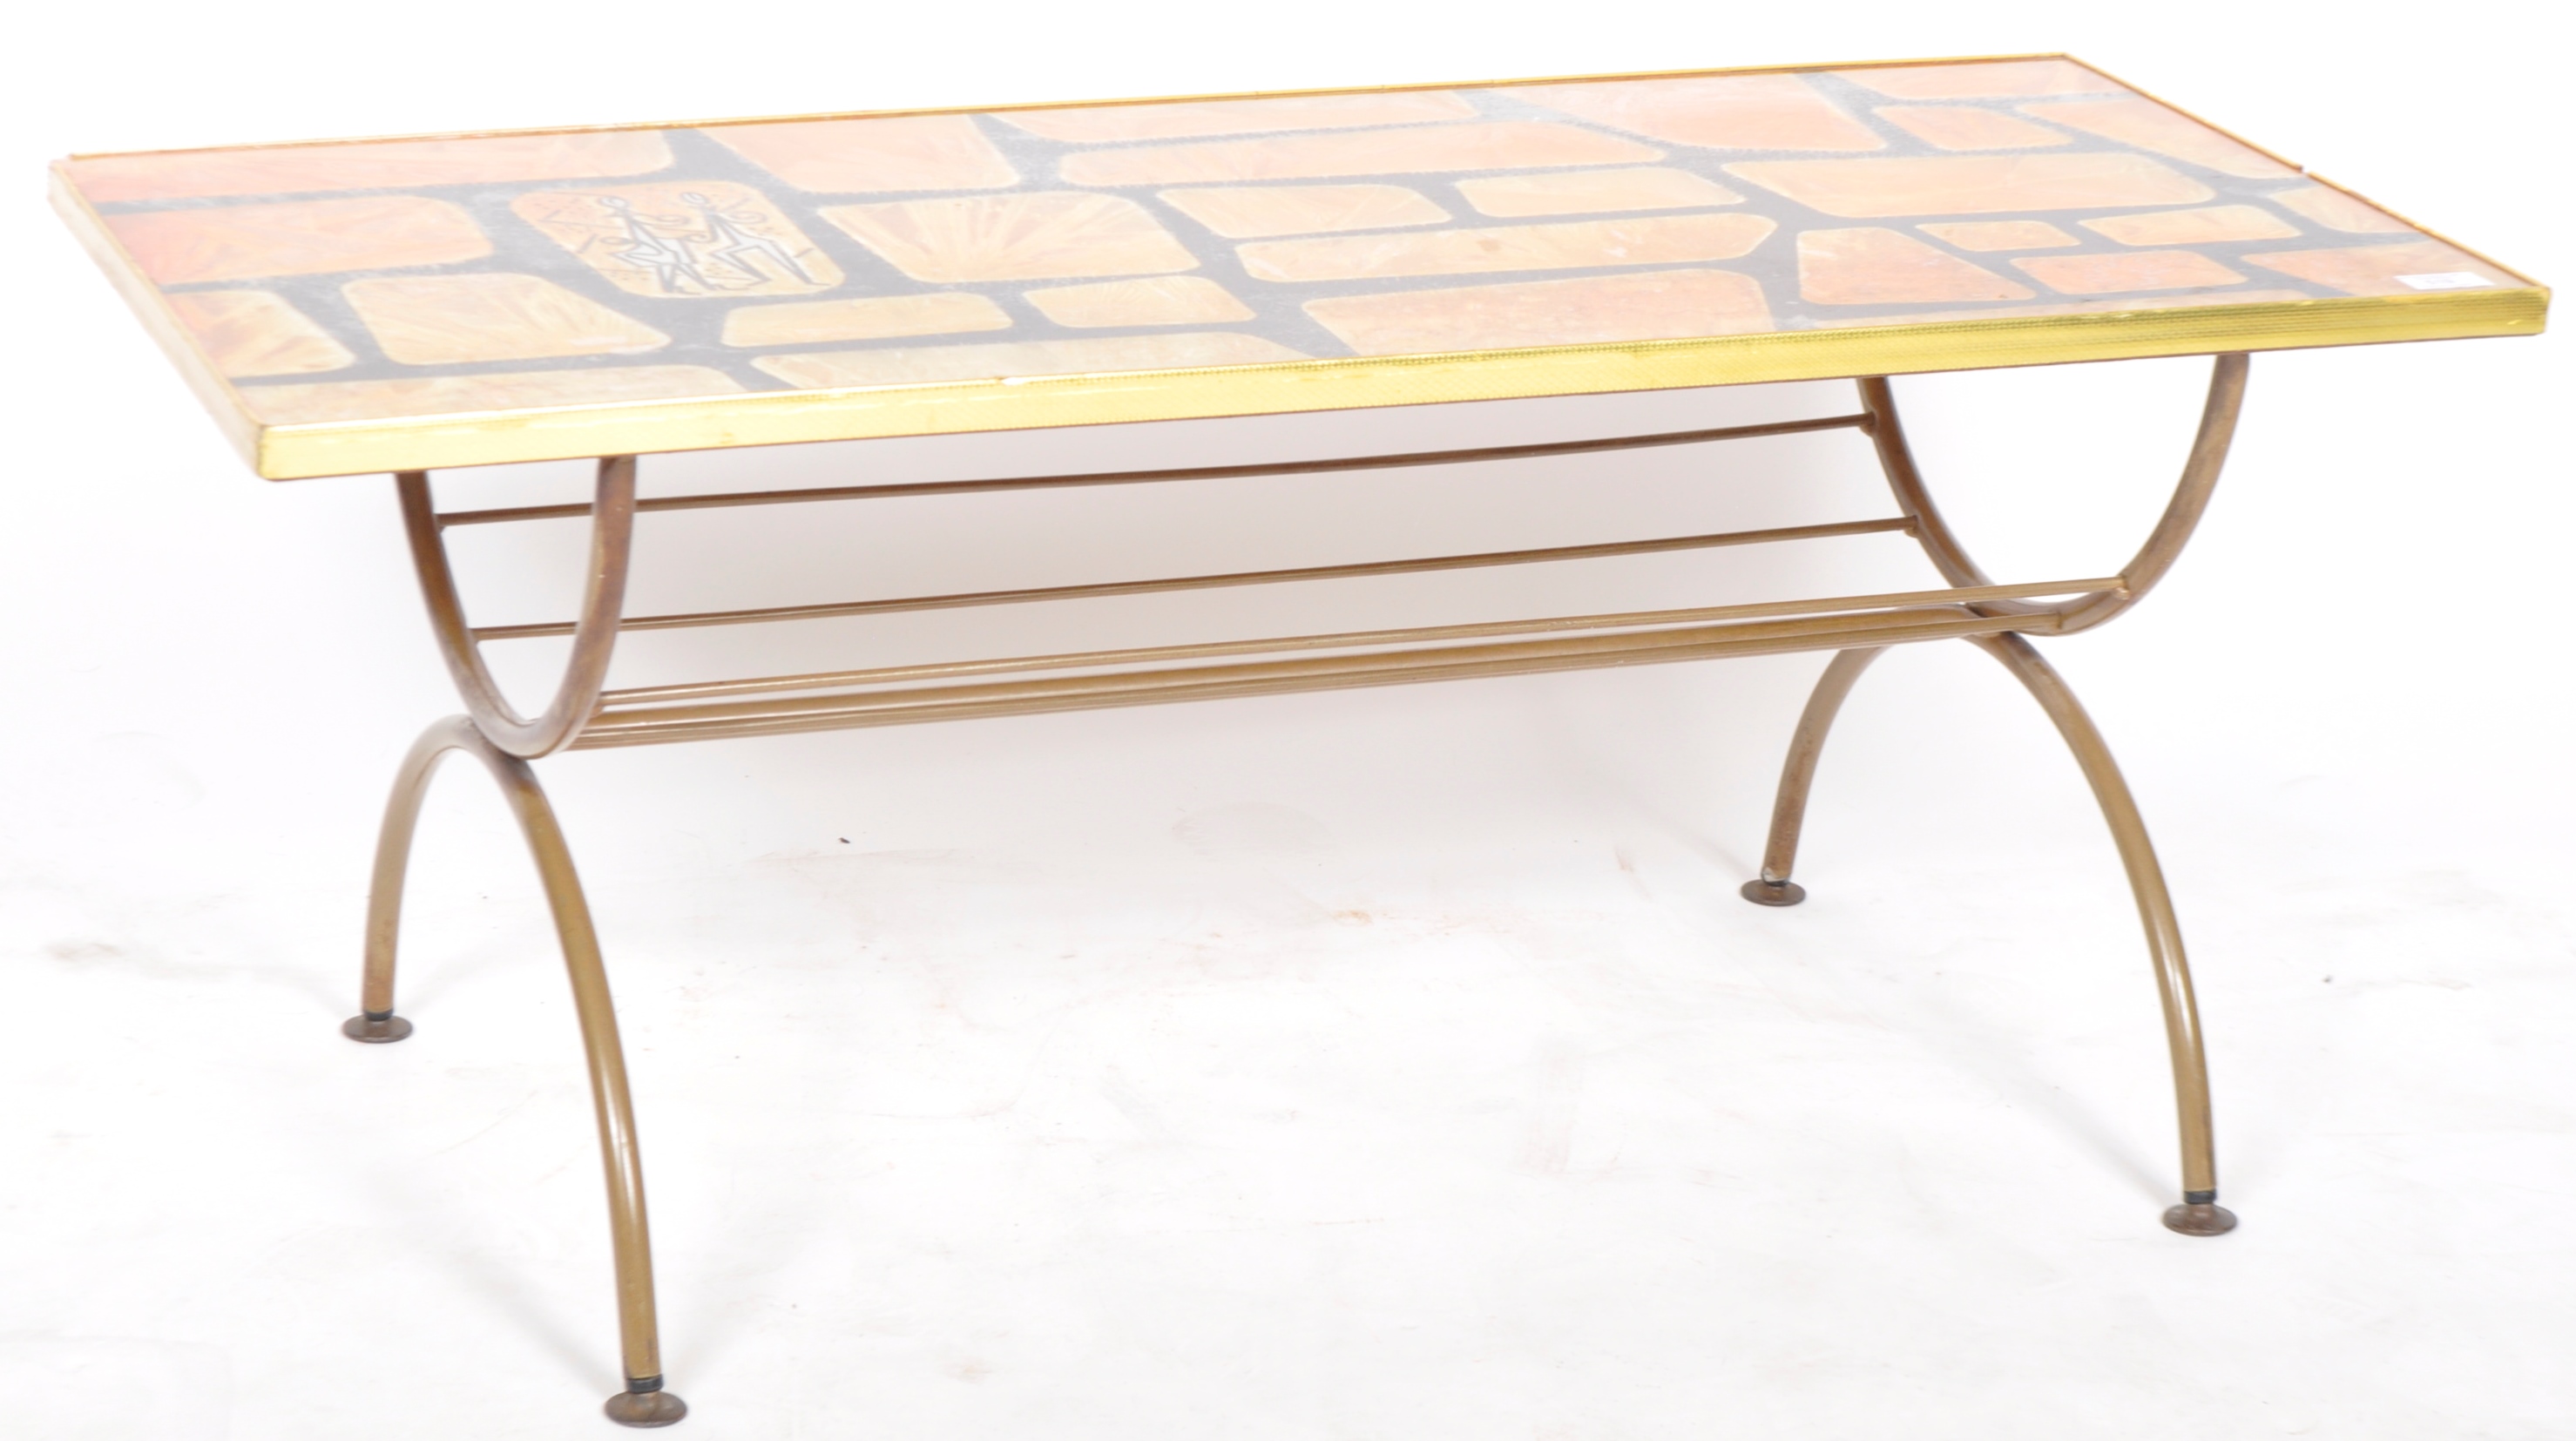 DENMOR OF LONDON - MID CENTURY METAL AND GLASS COFFEE TABLE - Image 2 of 6